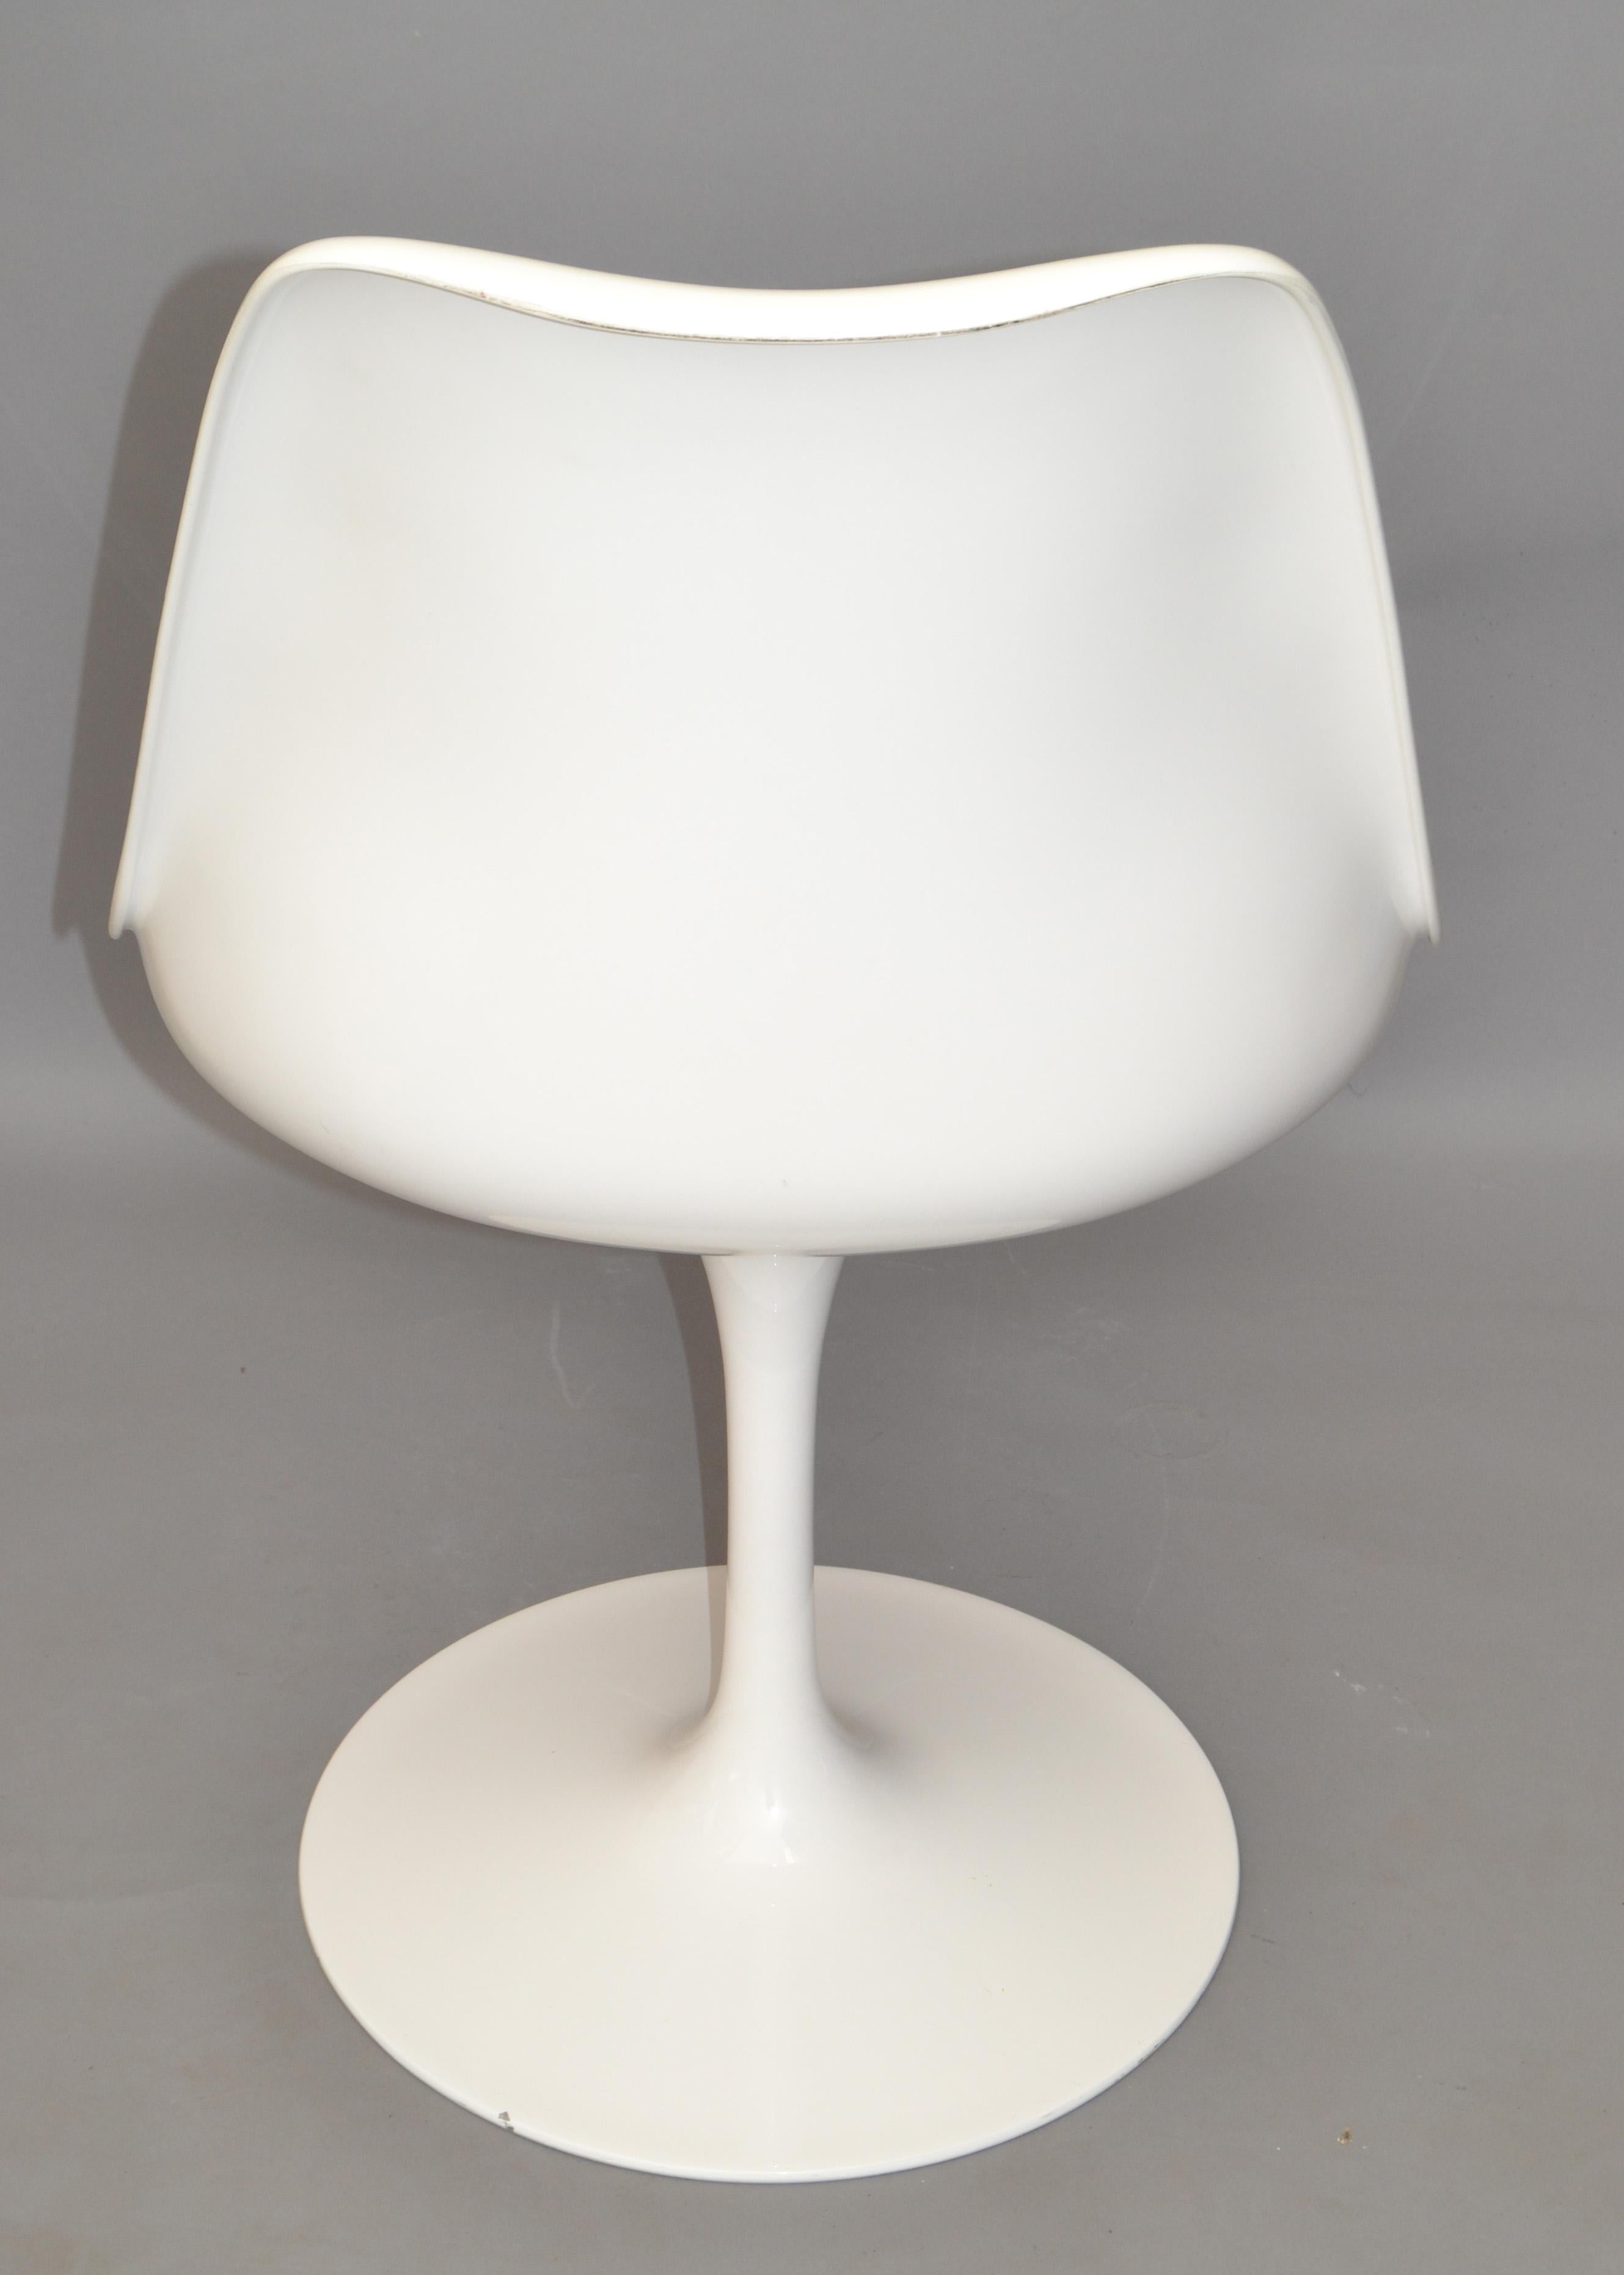 Tulip Swivel Chair in the Style of Knoll Attributed to Eero Saarinen White Blue 2